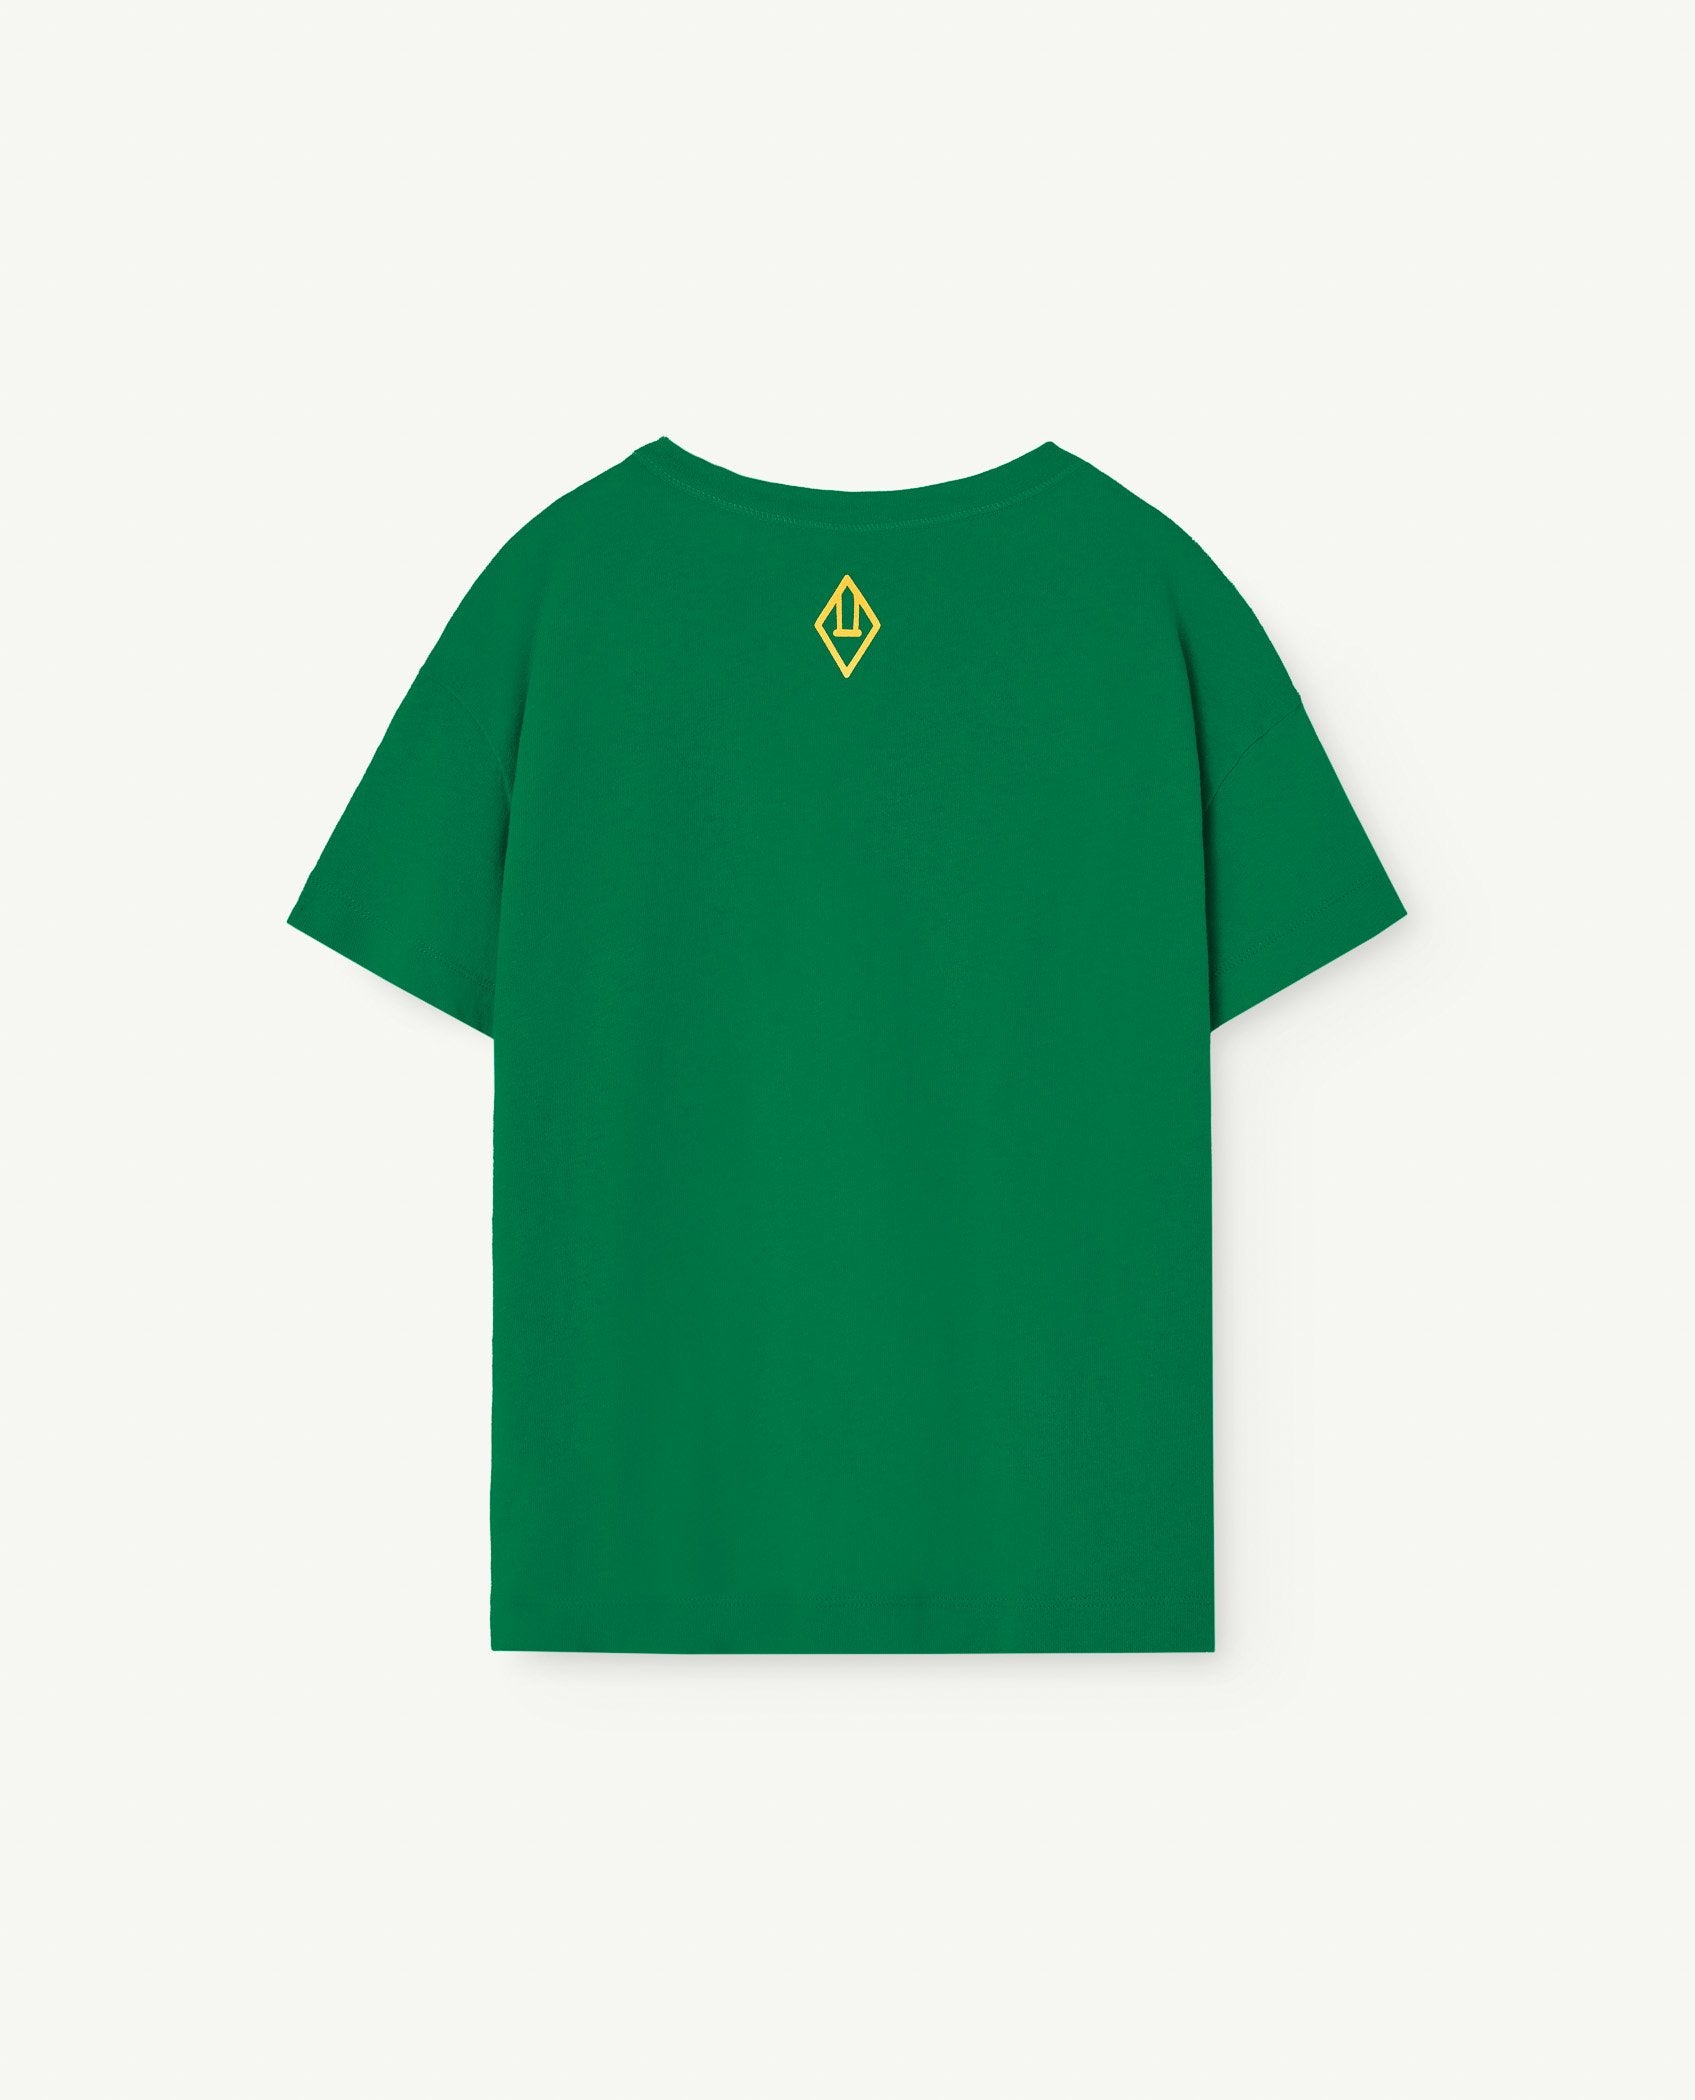 Green Orion Kids T-Shirt PRODUCT BACK